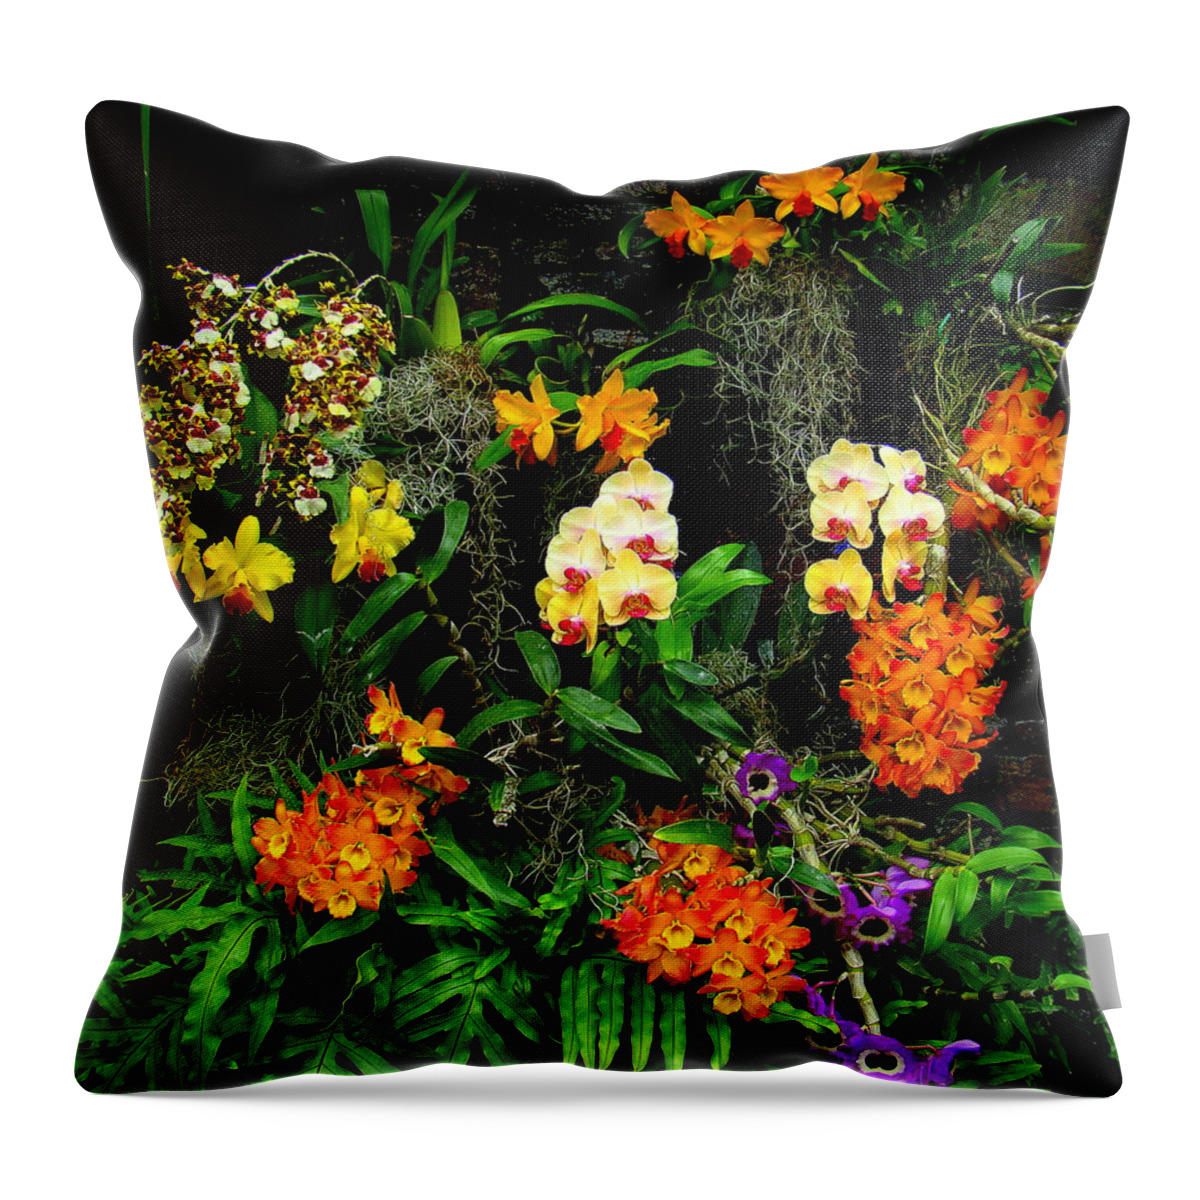 Fine Art Throw Pillow featuring the photograph Chorus by Rodney Lee Williams